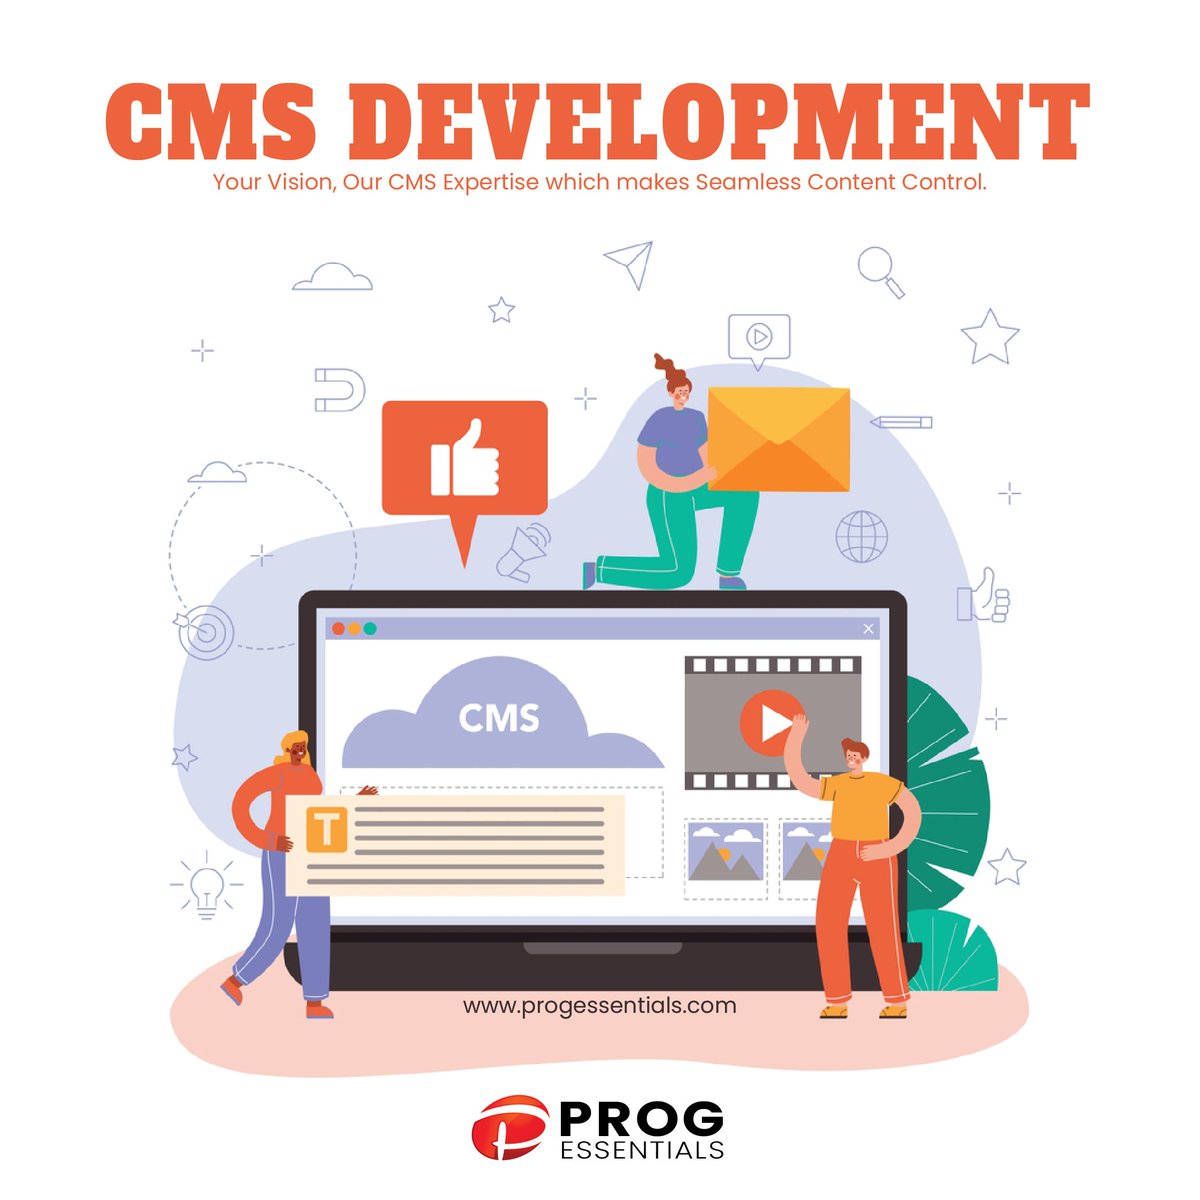 A content management system (CMS) is a software application that enables users to create, manage and publish content.
.
.
#progessentials #softwareapplication #cmsdevelopment